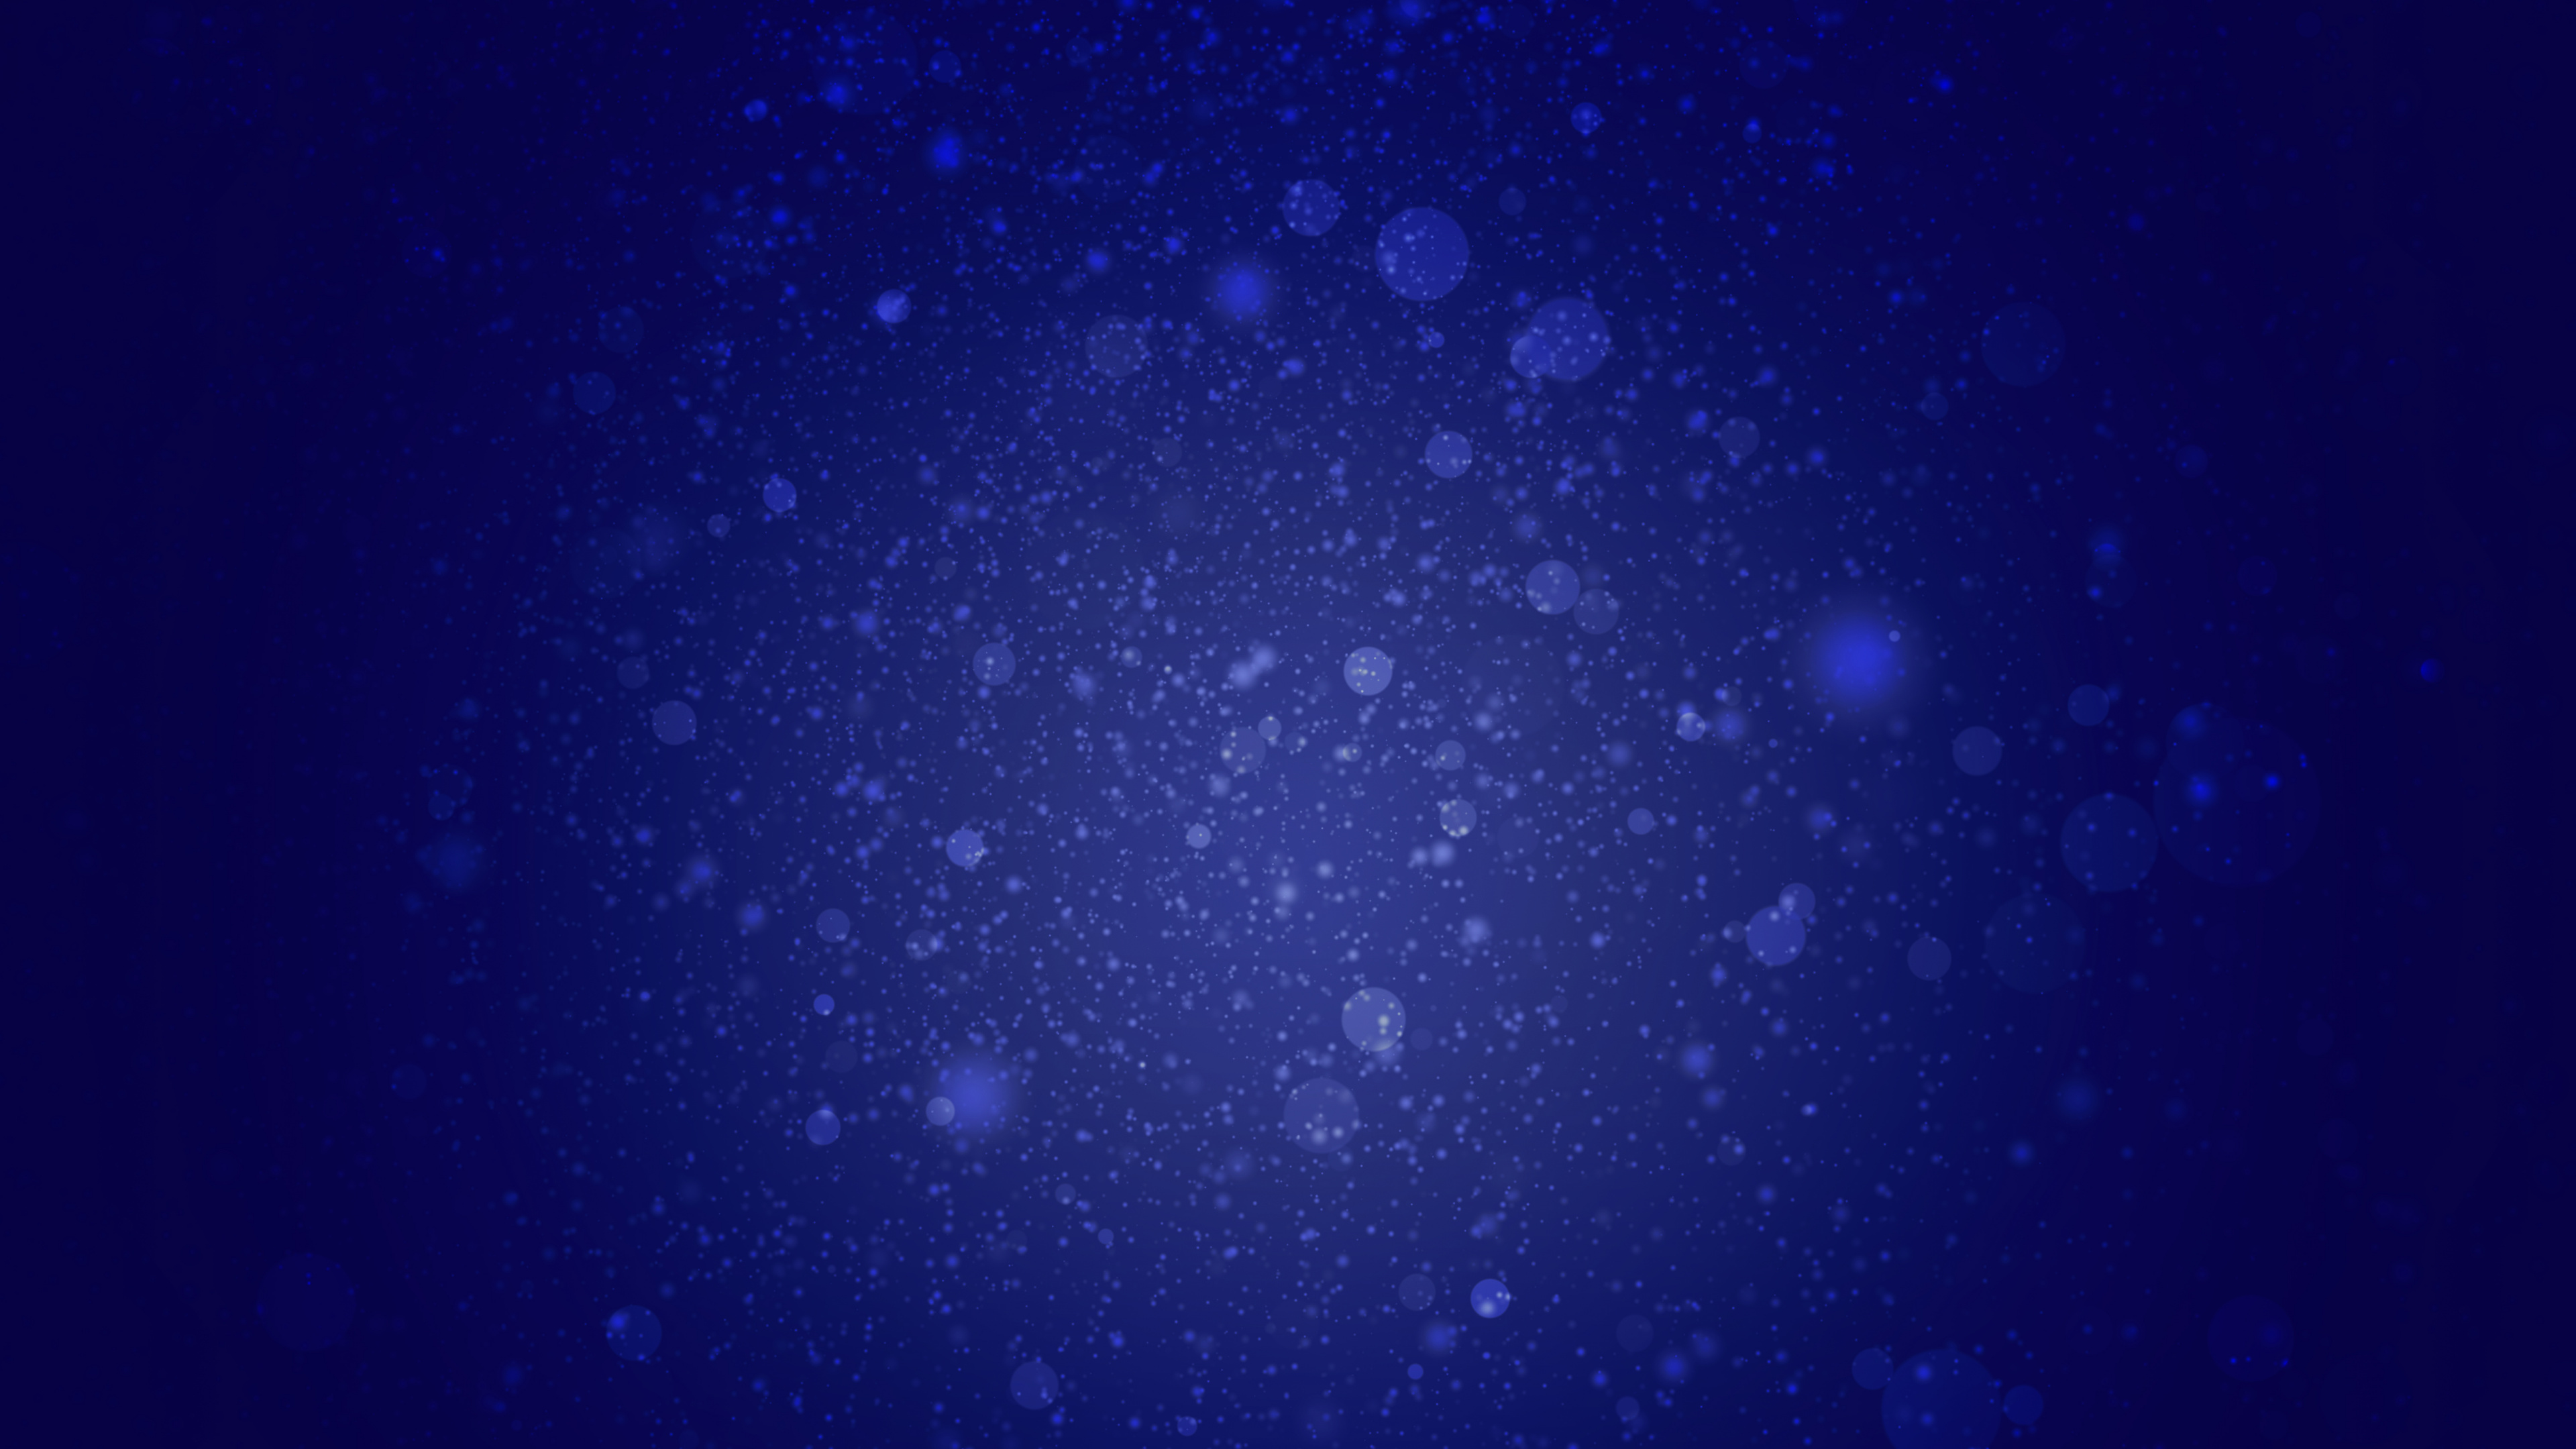 Blue and White Galaxy Illustration. Wallpaper in 3840x2160 Resolution